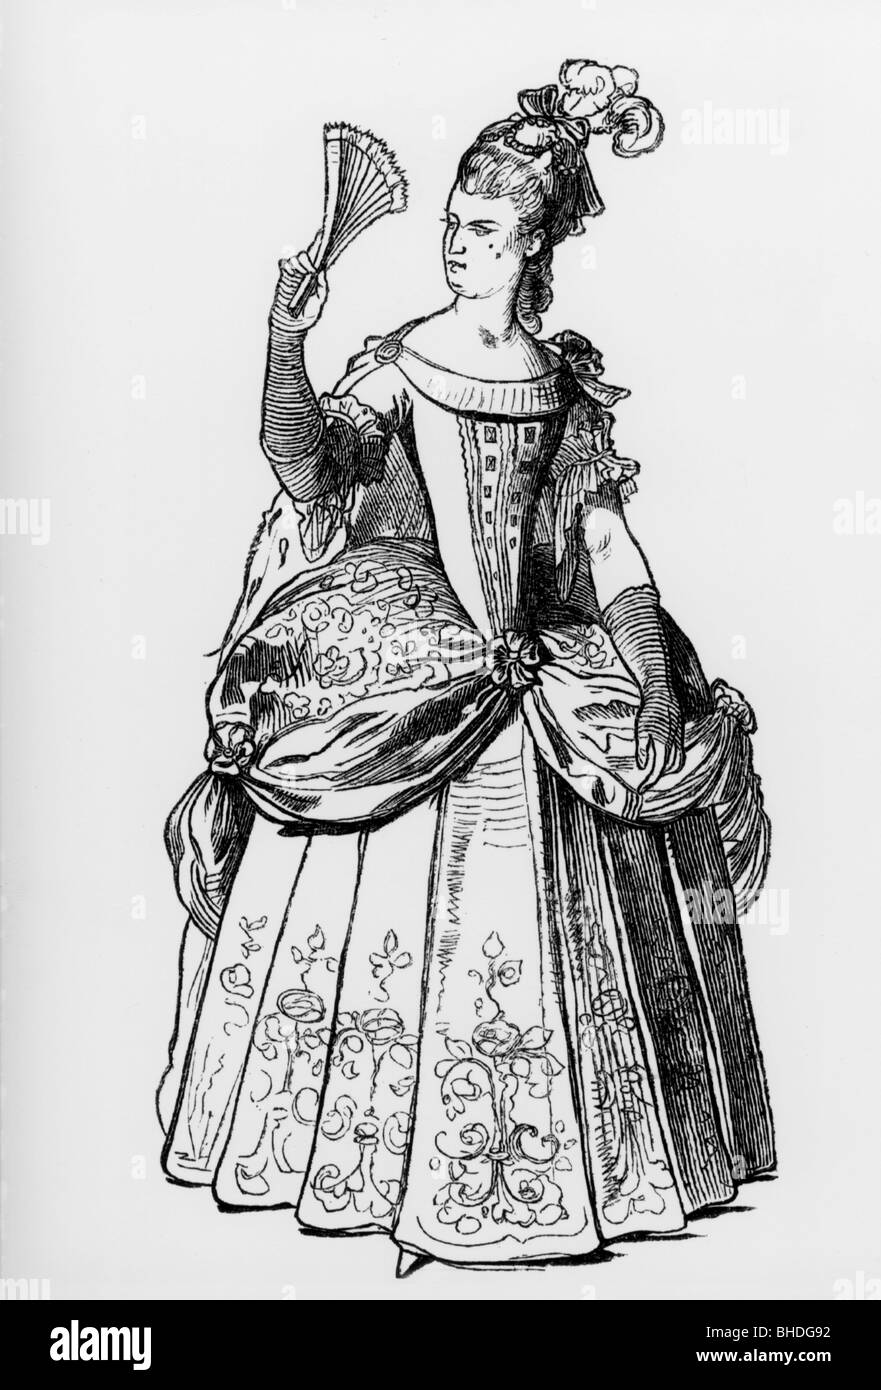 fashion, 18th century, 'Die Fuerstin' (The Princess), illustration from 'Muenchner Bilderbogen' (Munich Sheet of Pictures), wood engraving, 19th century, Stock Photo